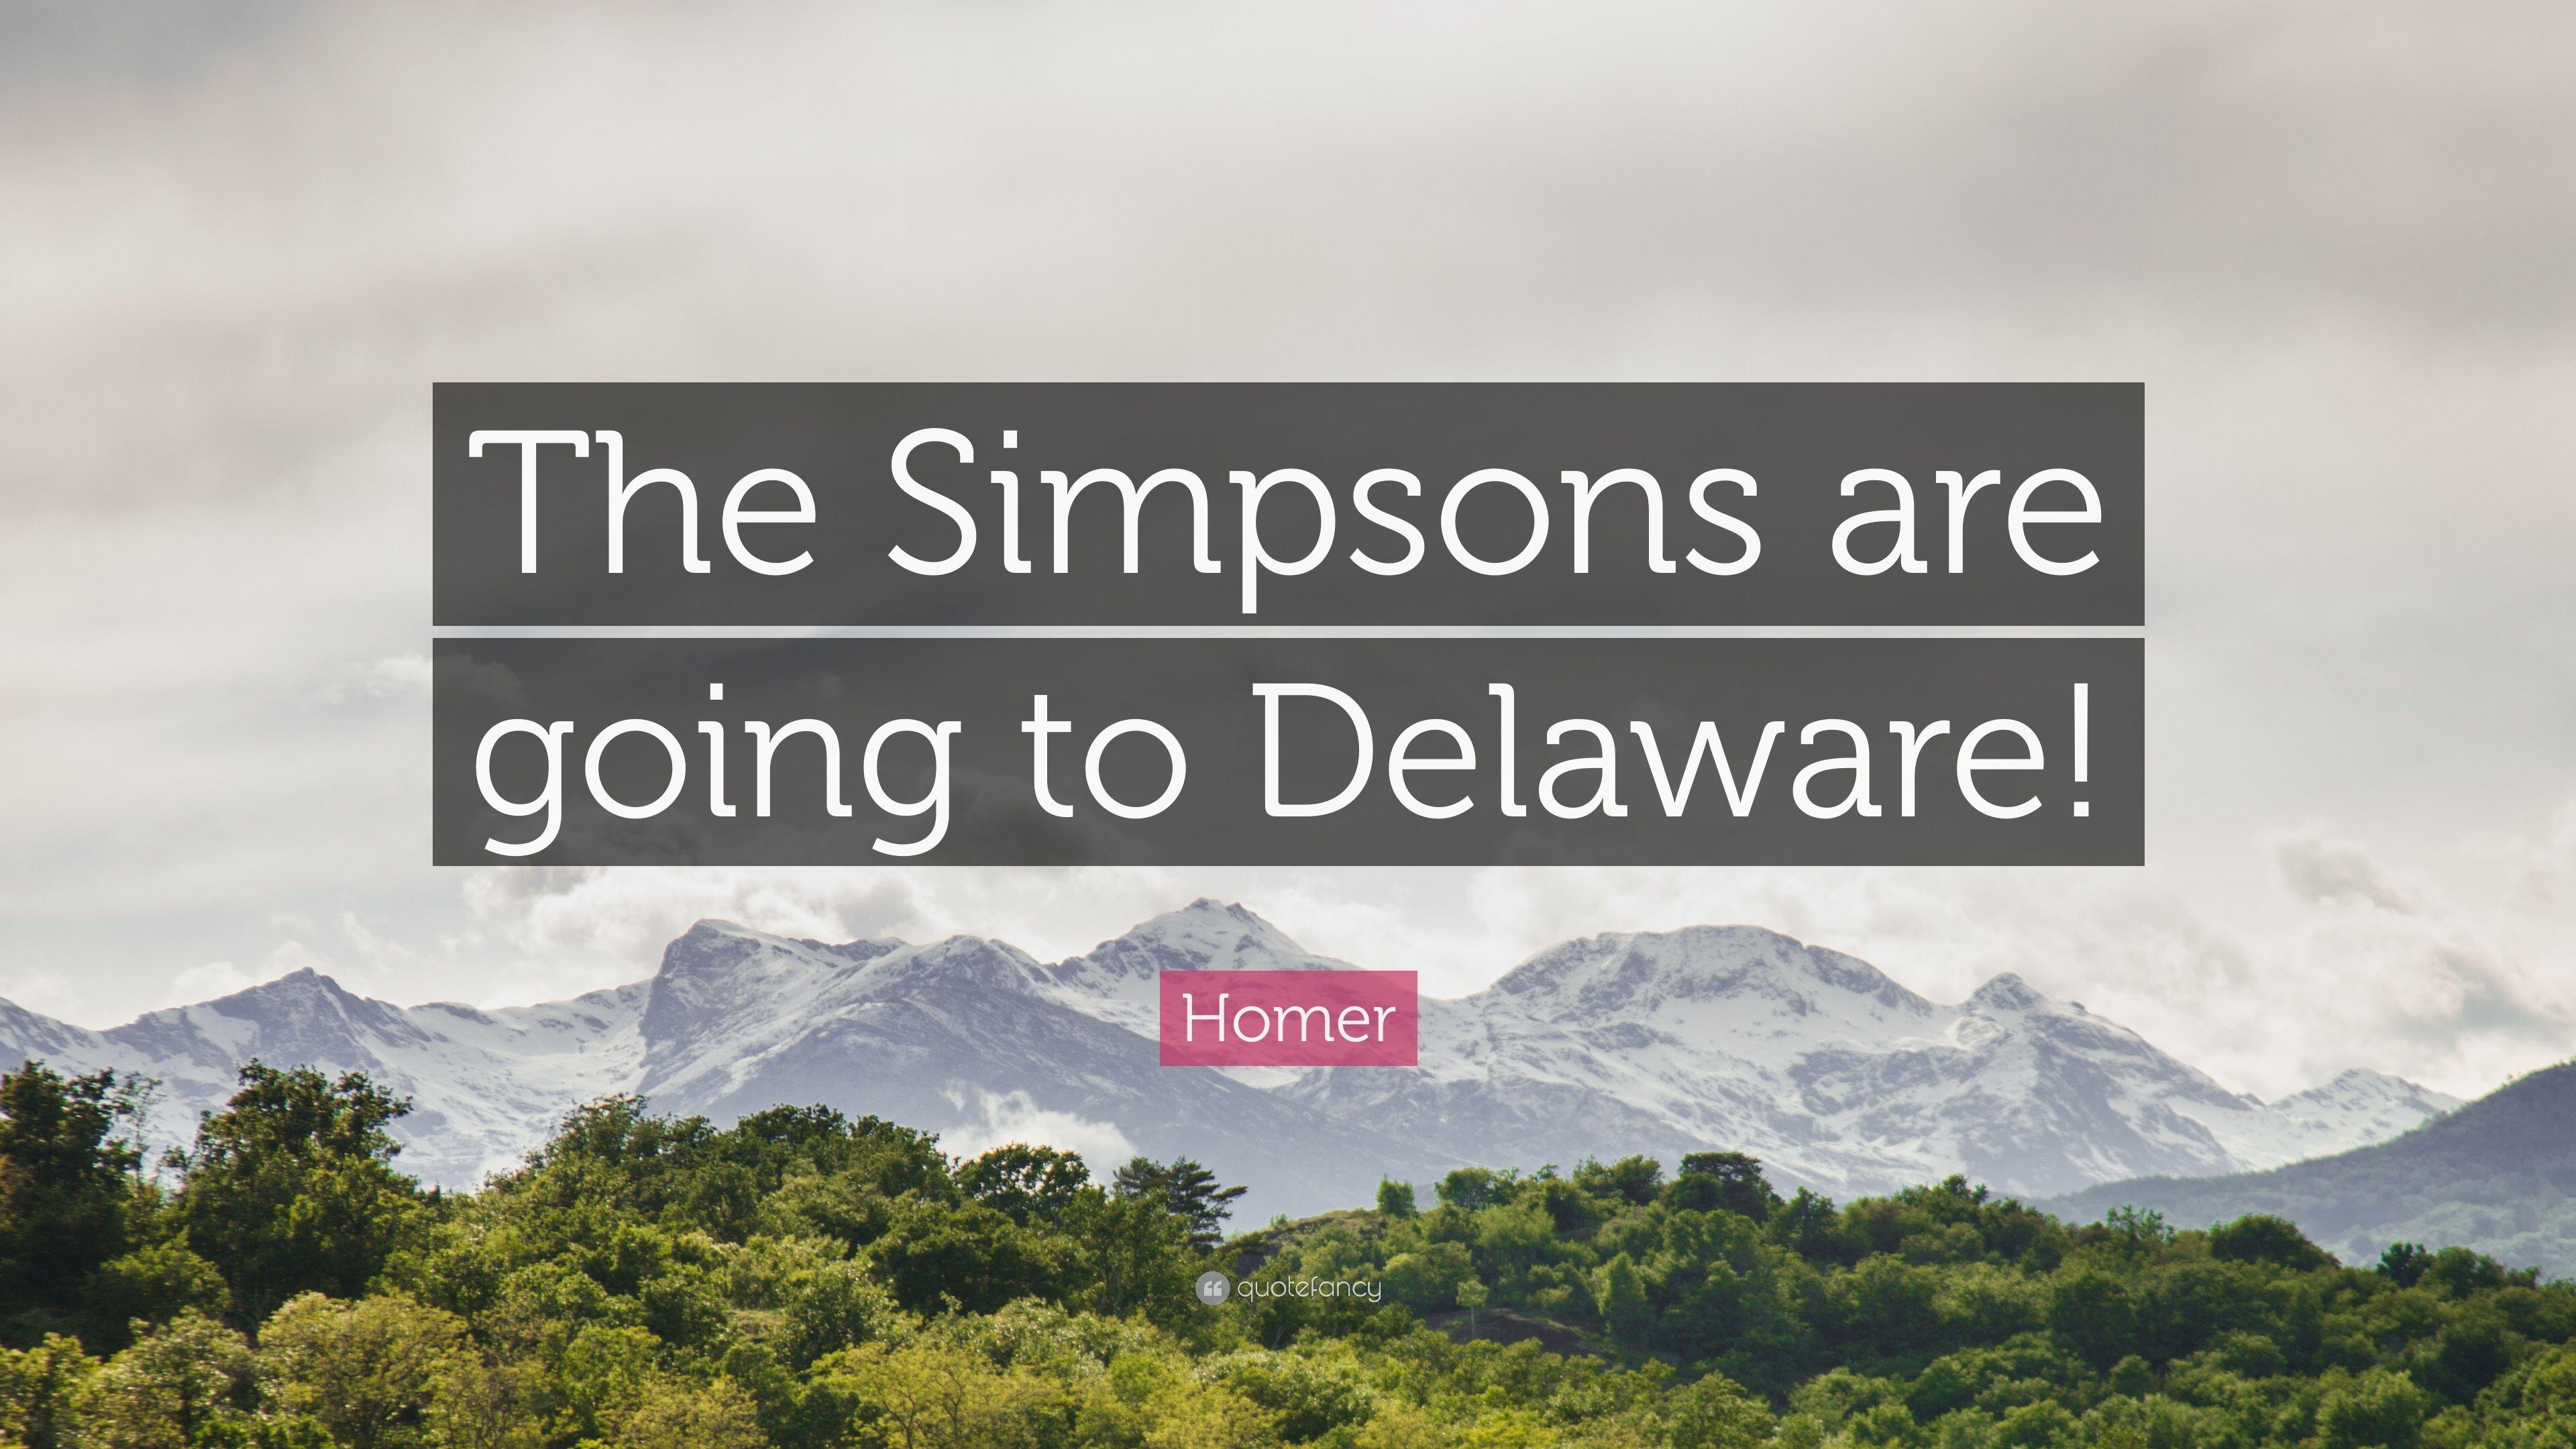 Homer Quote: “The Simpsons are going to Delaware!” 7 wallpaper